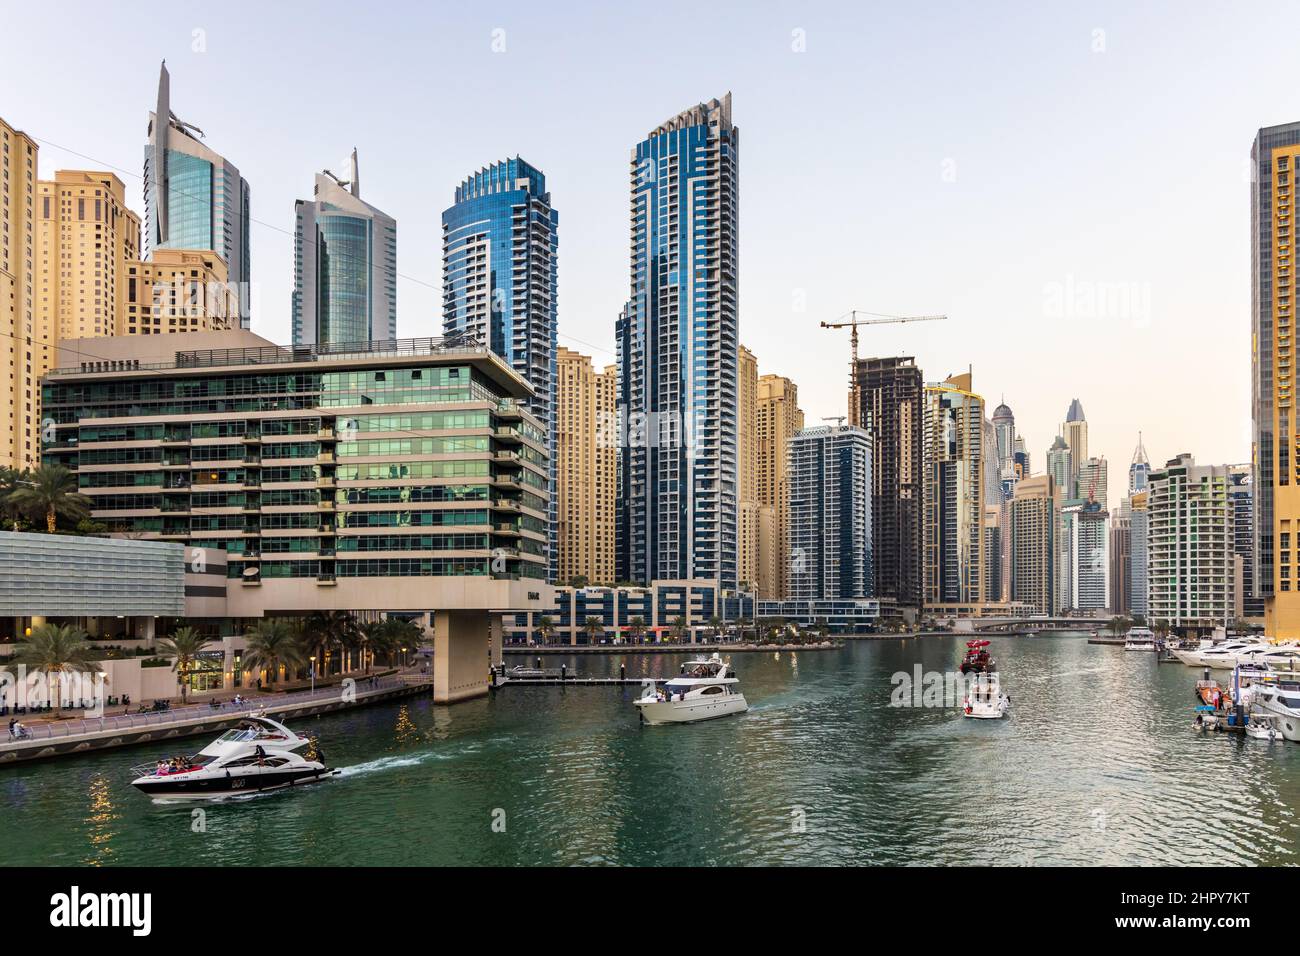 Yachts and boats cruising in Dubai Marina, surrounded by numerous residential skyscrapers, restaurants, shops and hotels. UAE Stock Photo